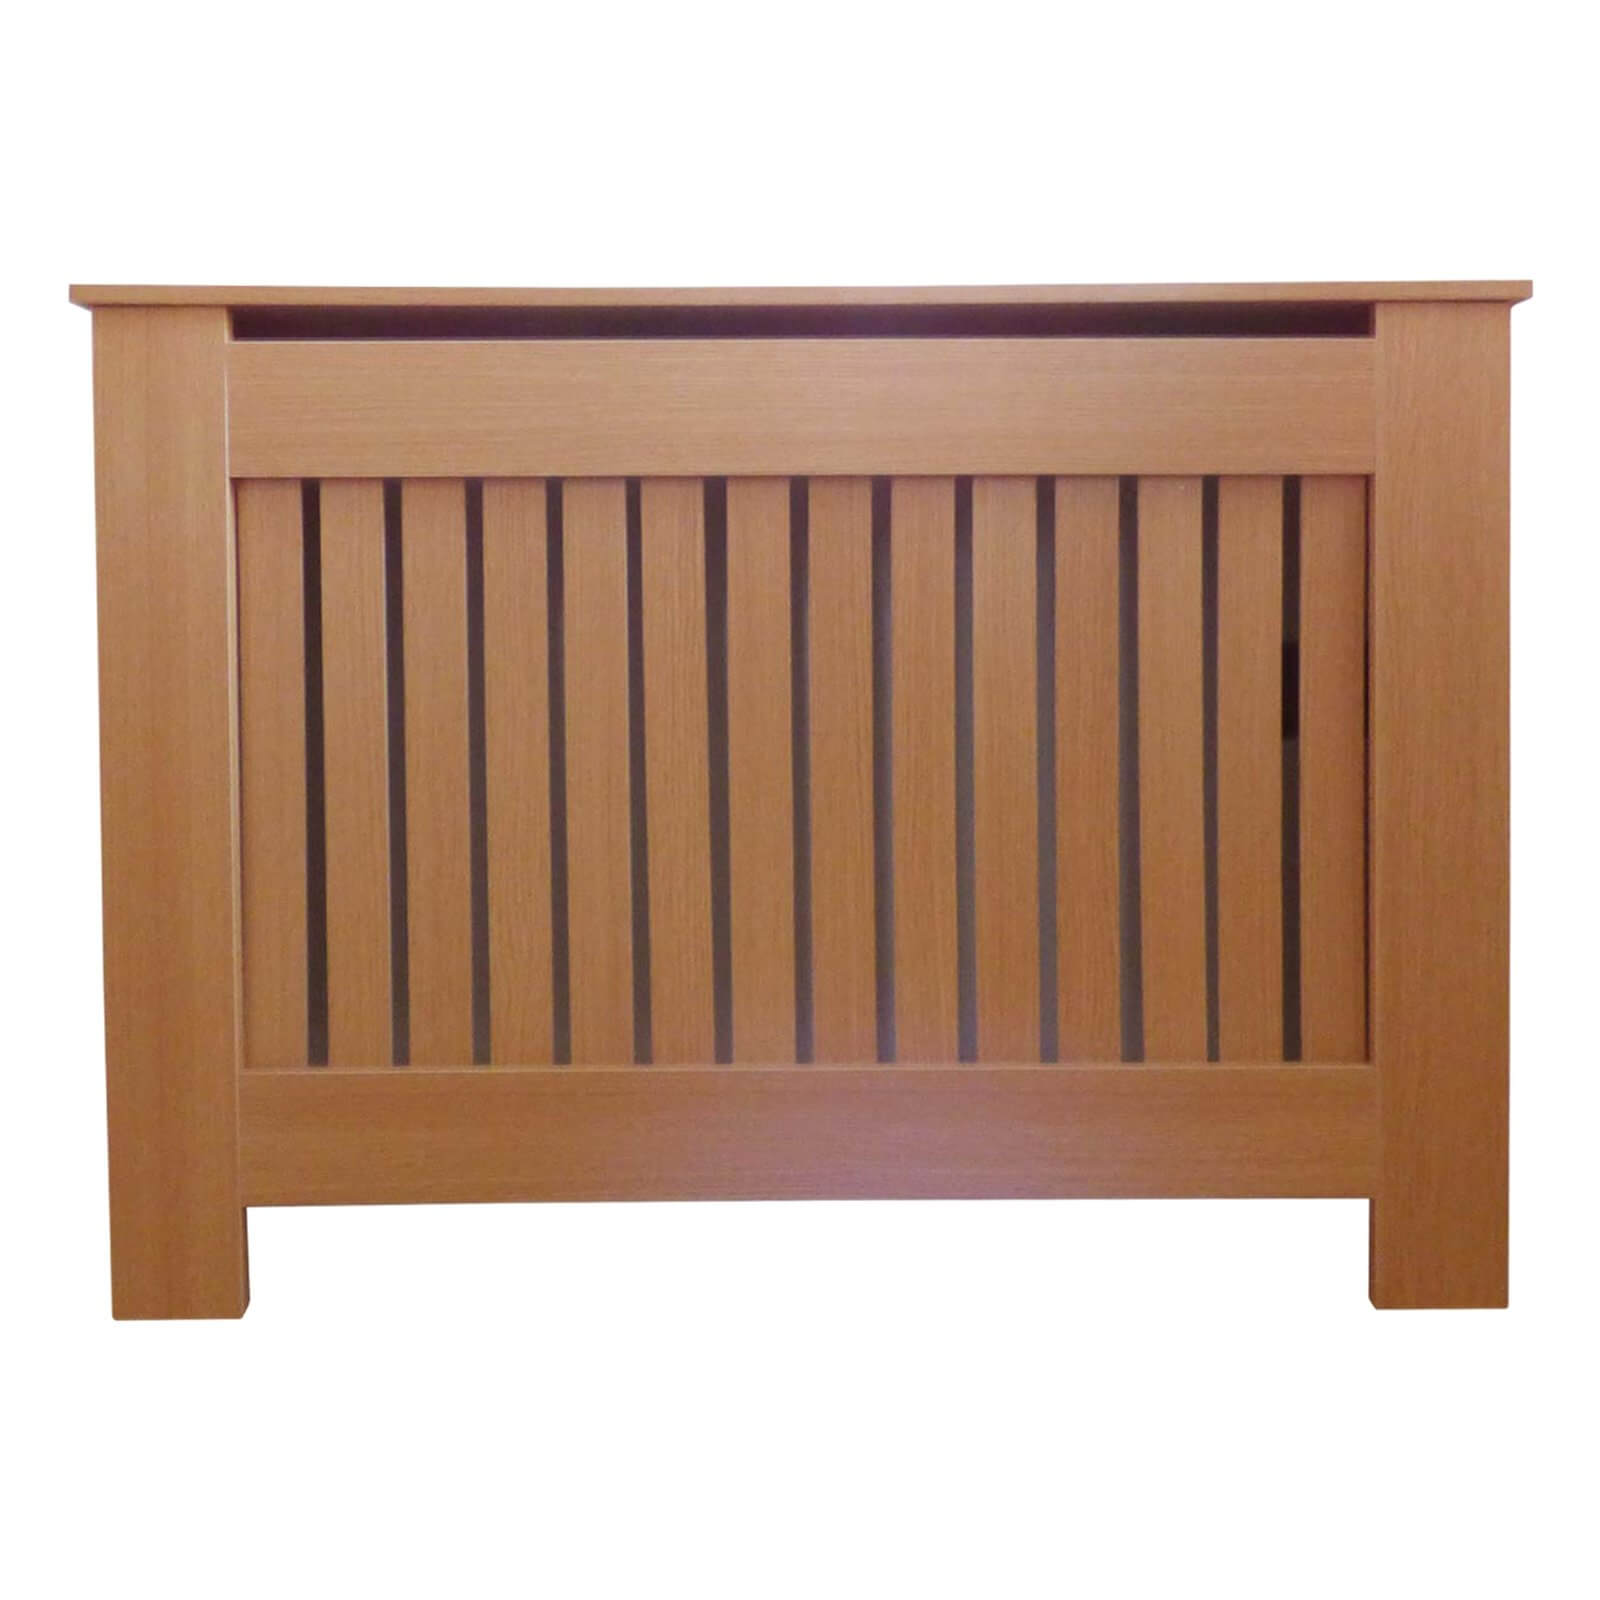 Radiator Cover with Vertical Slatted Design in Oak - Small